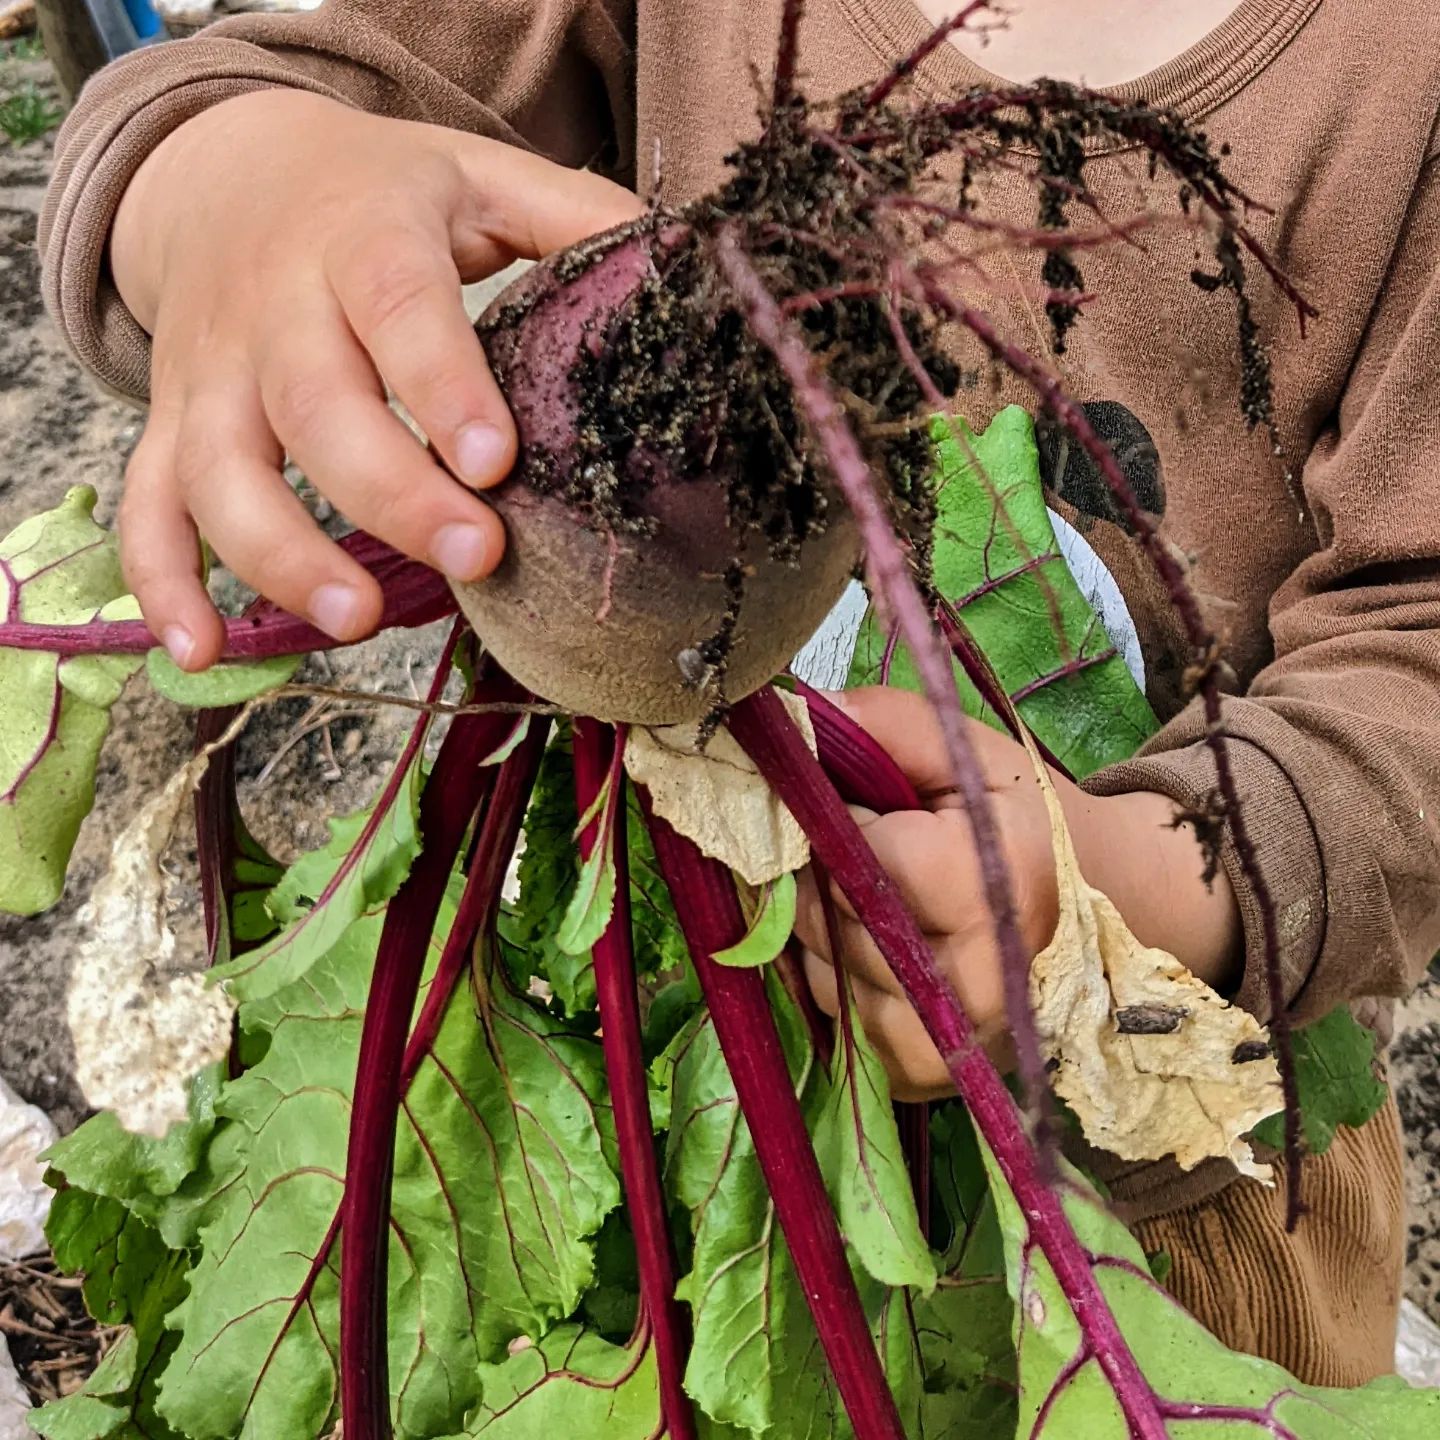 The beets are ready and our youngest carefully picked this one for lunch